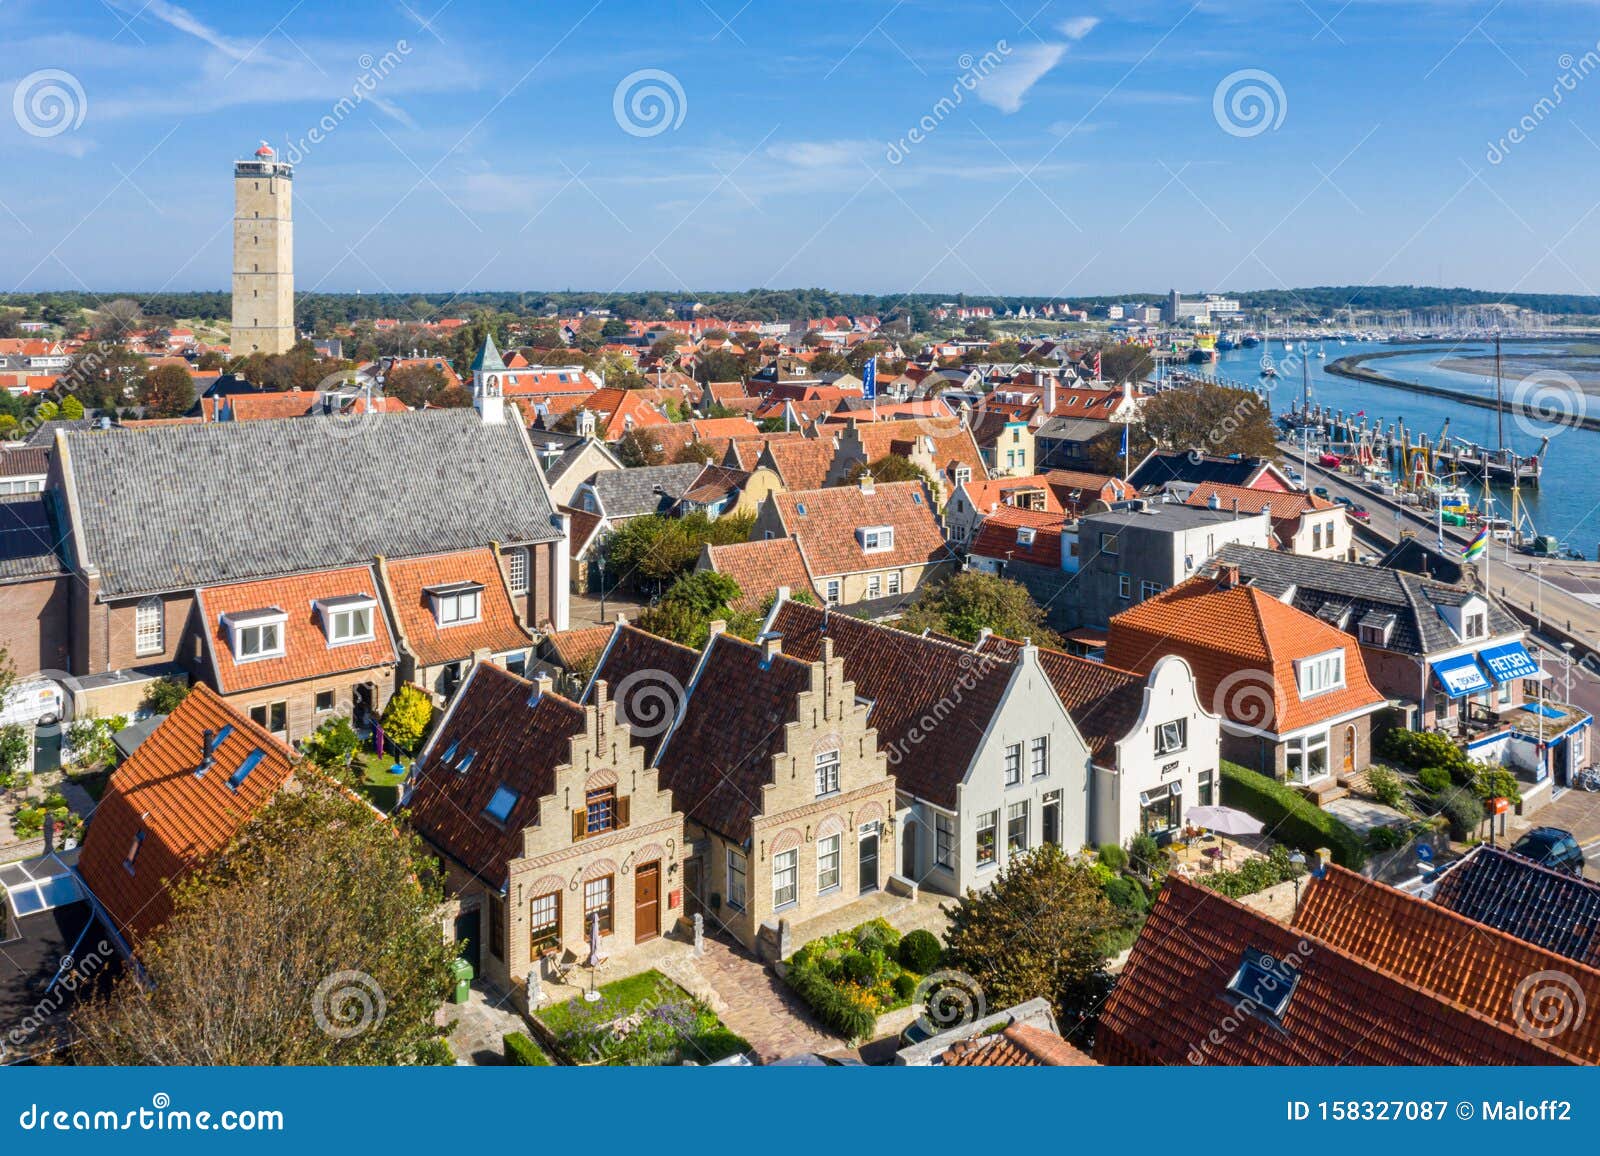 brandaris lighthouse and westerkerk, harbour and historical houses of west-terschelling town. west frisian islands.